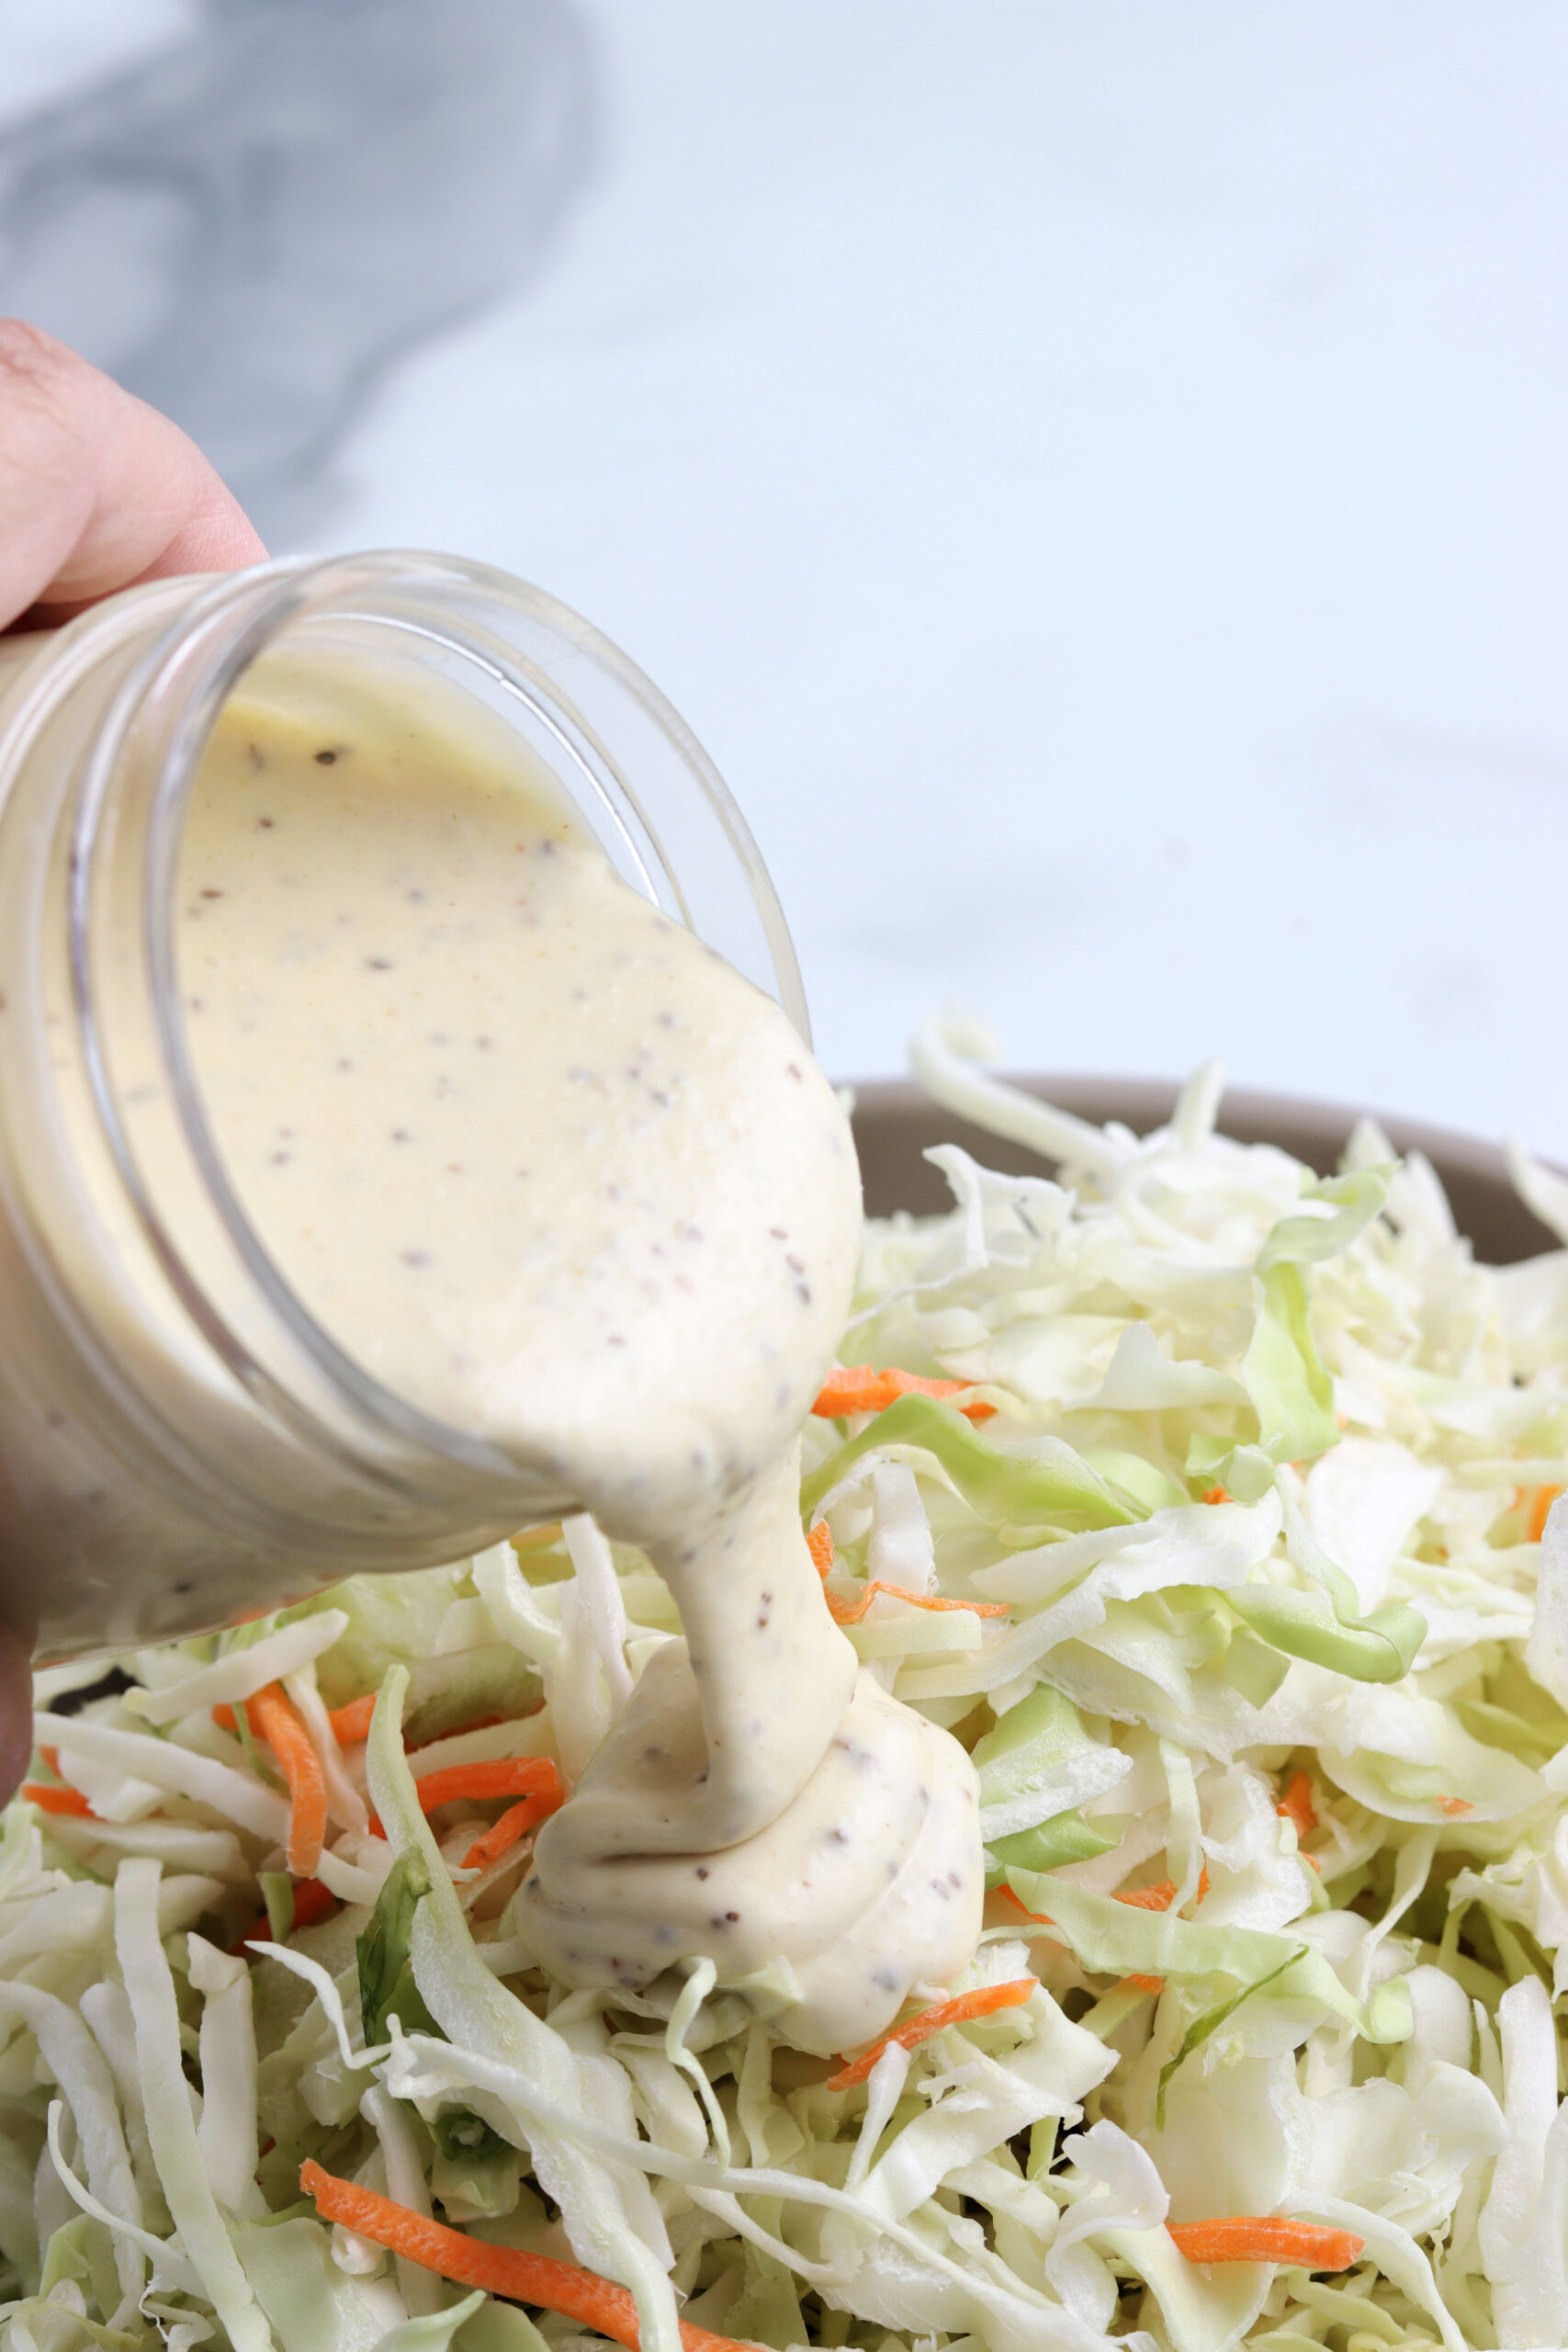 Seriously Easy Coleslaw Recipe Dressing (Better than Store Bought!)